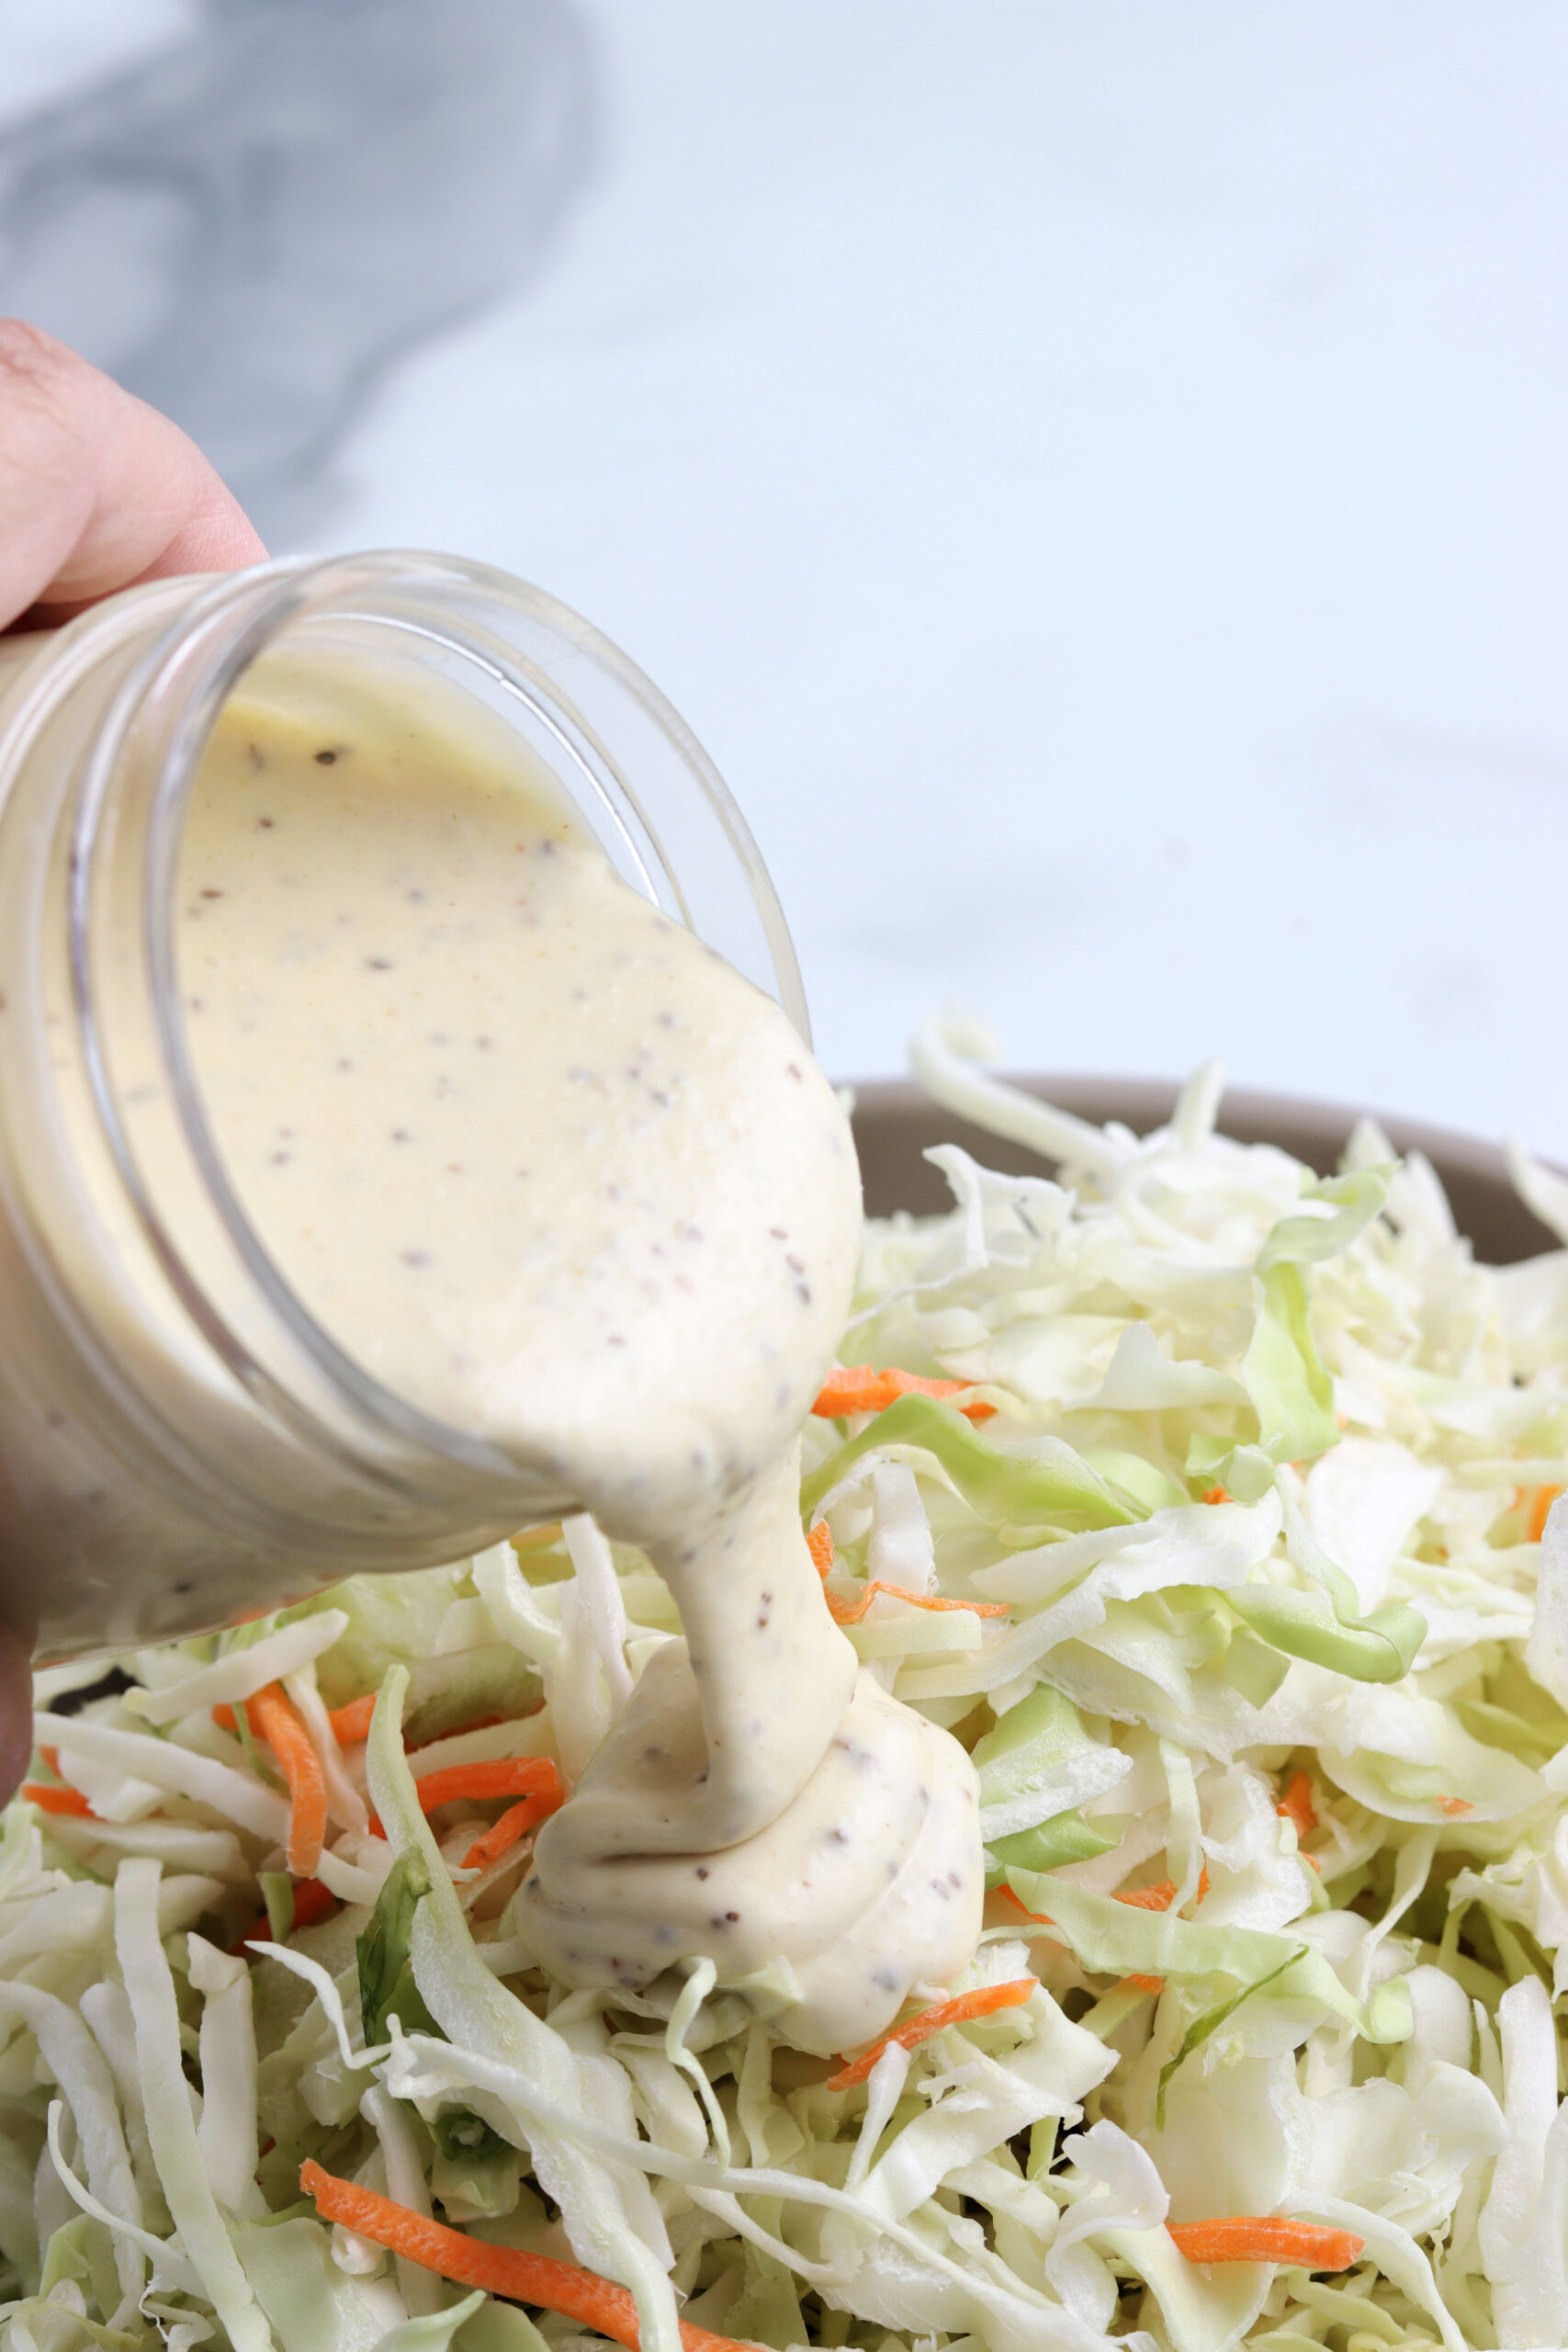 Seriously Easy Coleslaw Recipe Dressing (Better than Store Bought!)